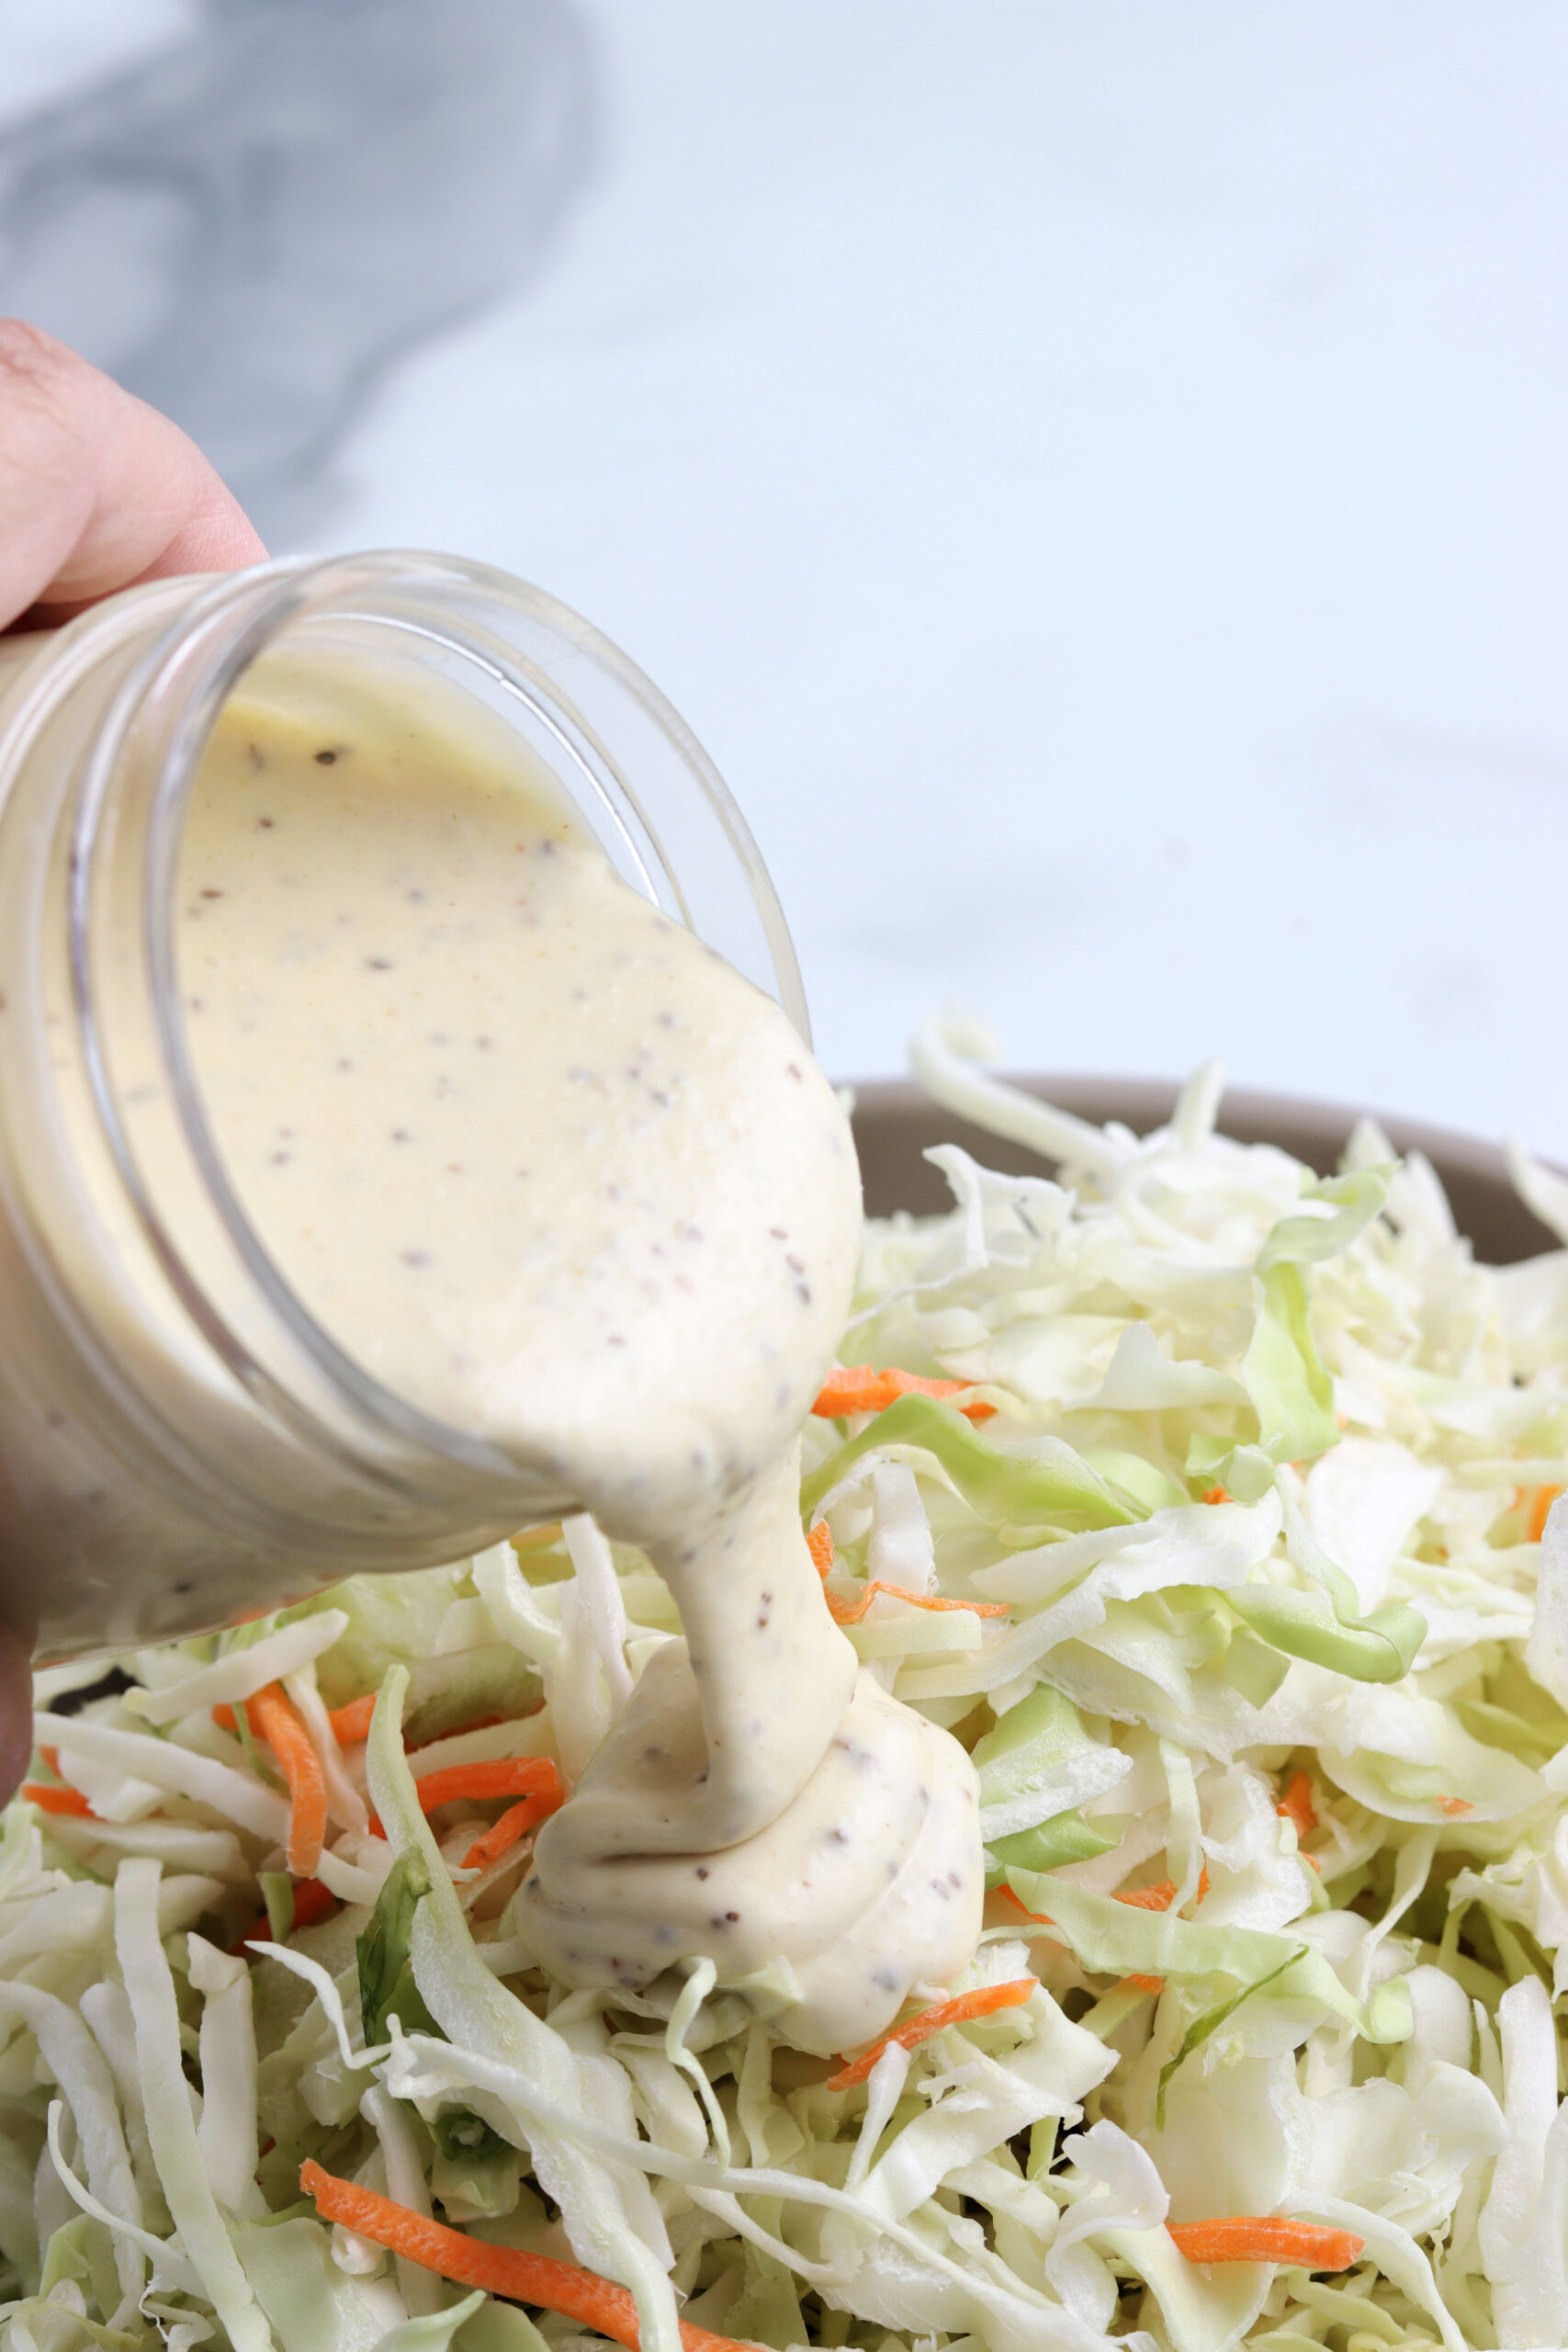 Seriously Easy Coleslaw Recipe Dressing (Better than Store Bought!)